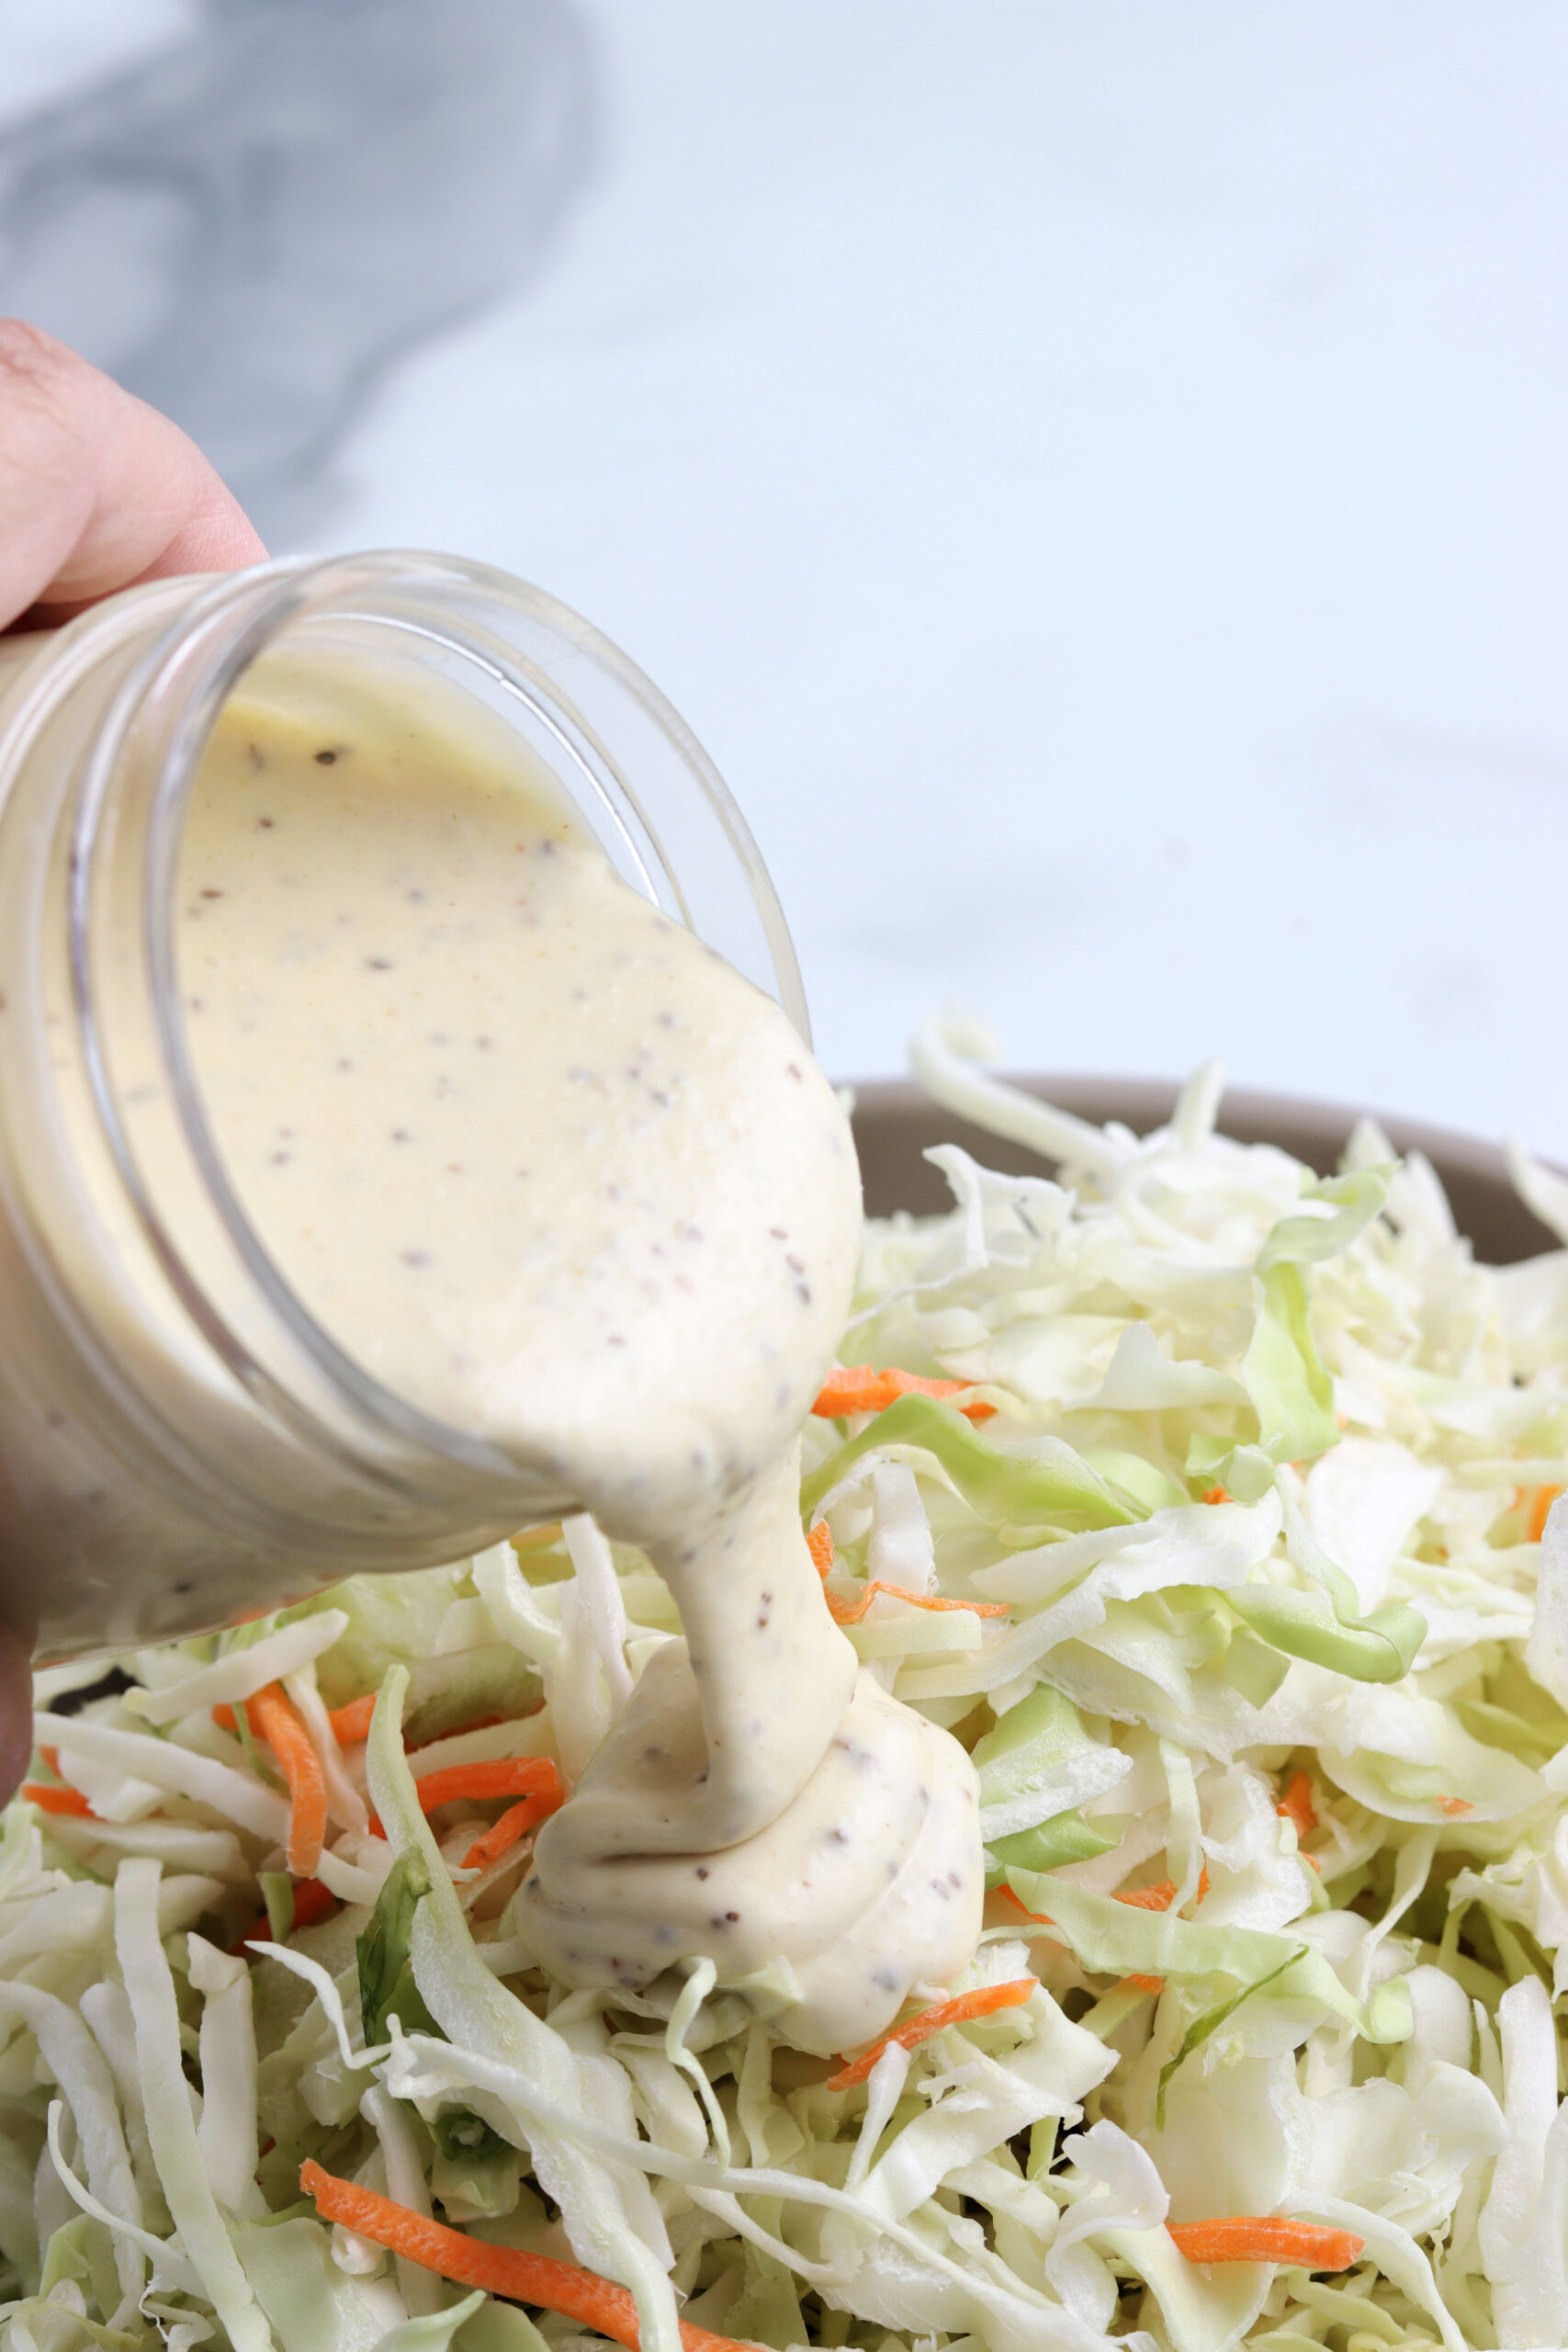 Seriously Easy Coleslaw Recipe Dressing (Better than Store Bought!)